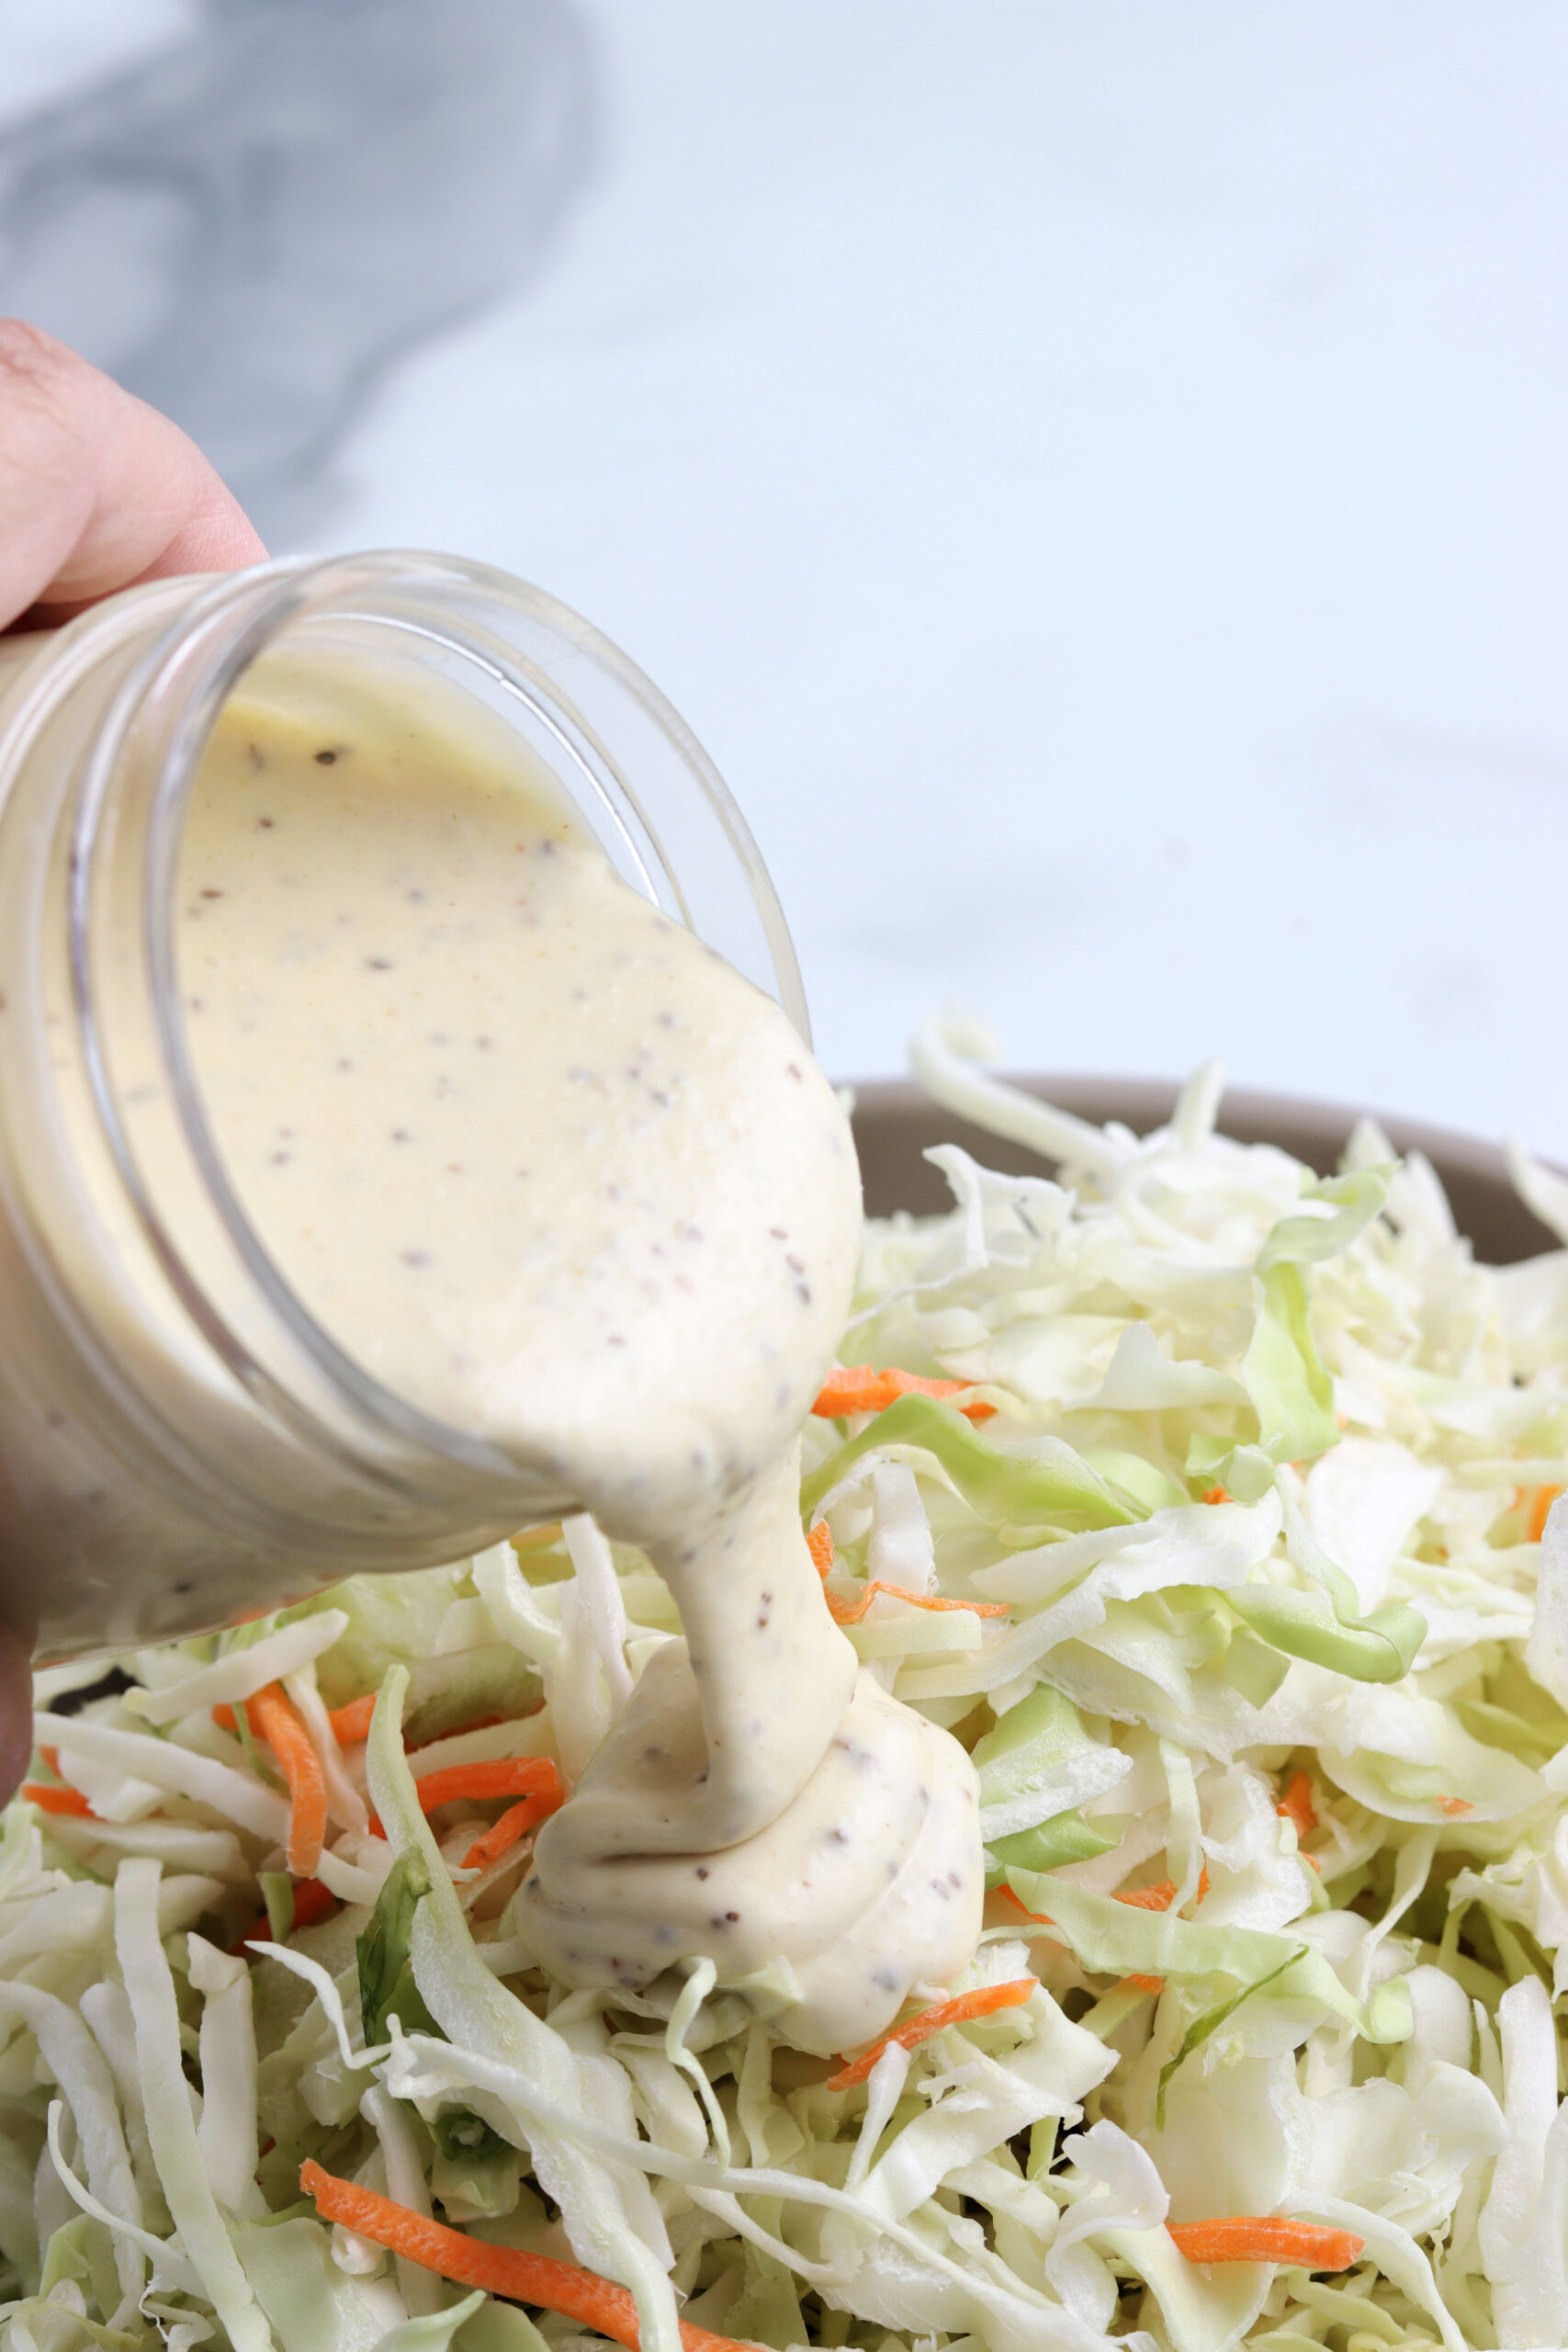 Seriously Easy Coleslaw Recipe Dressing (Better than Store Bought!)